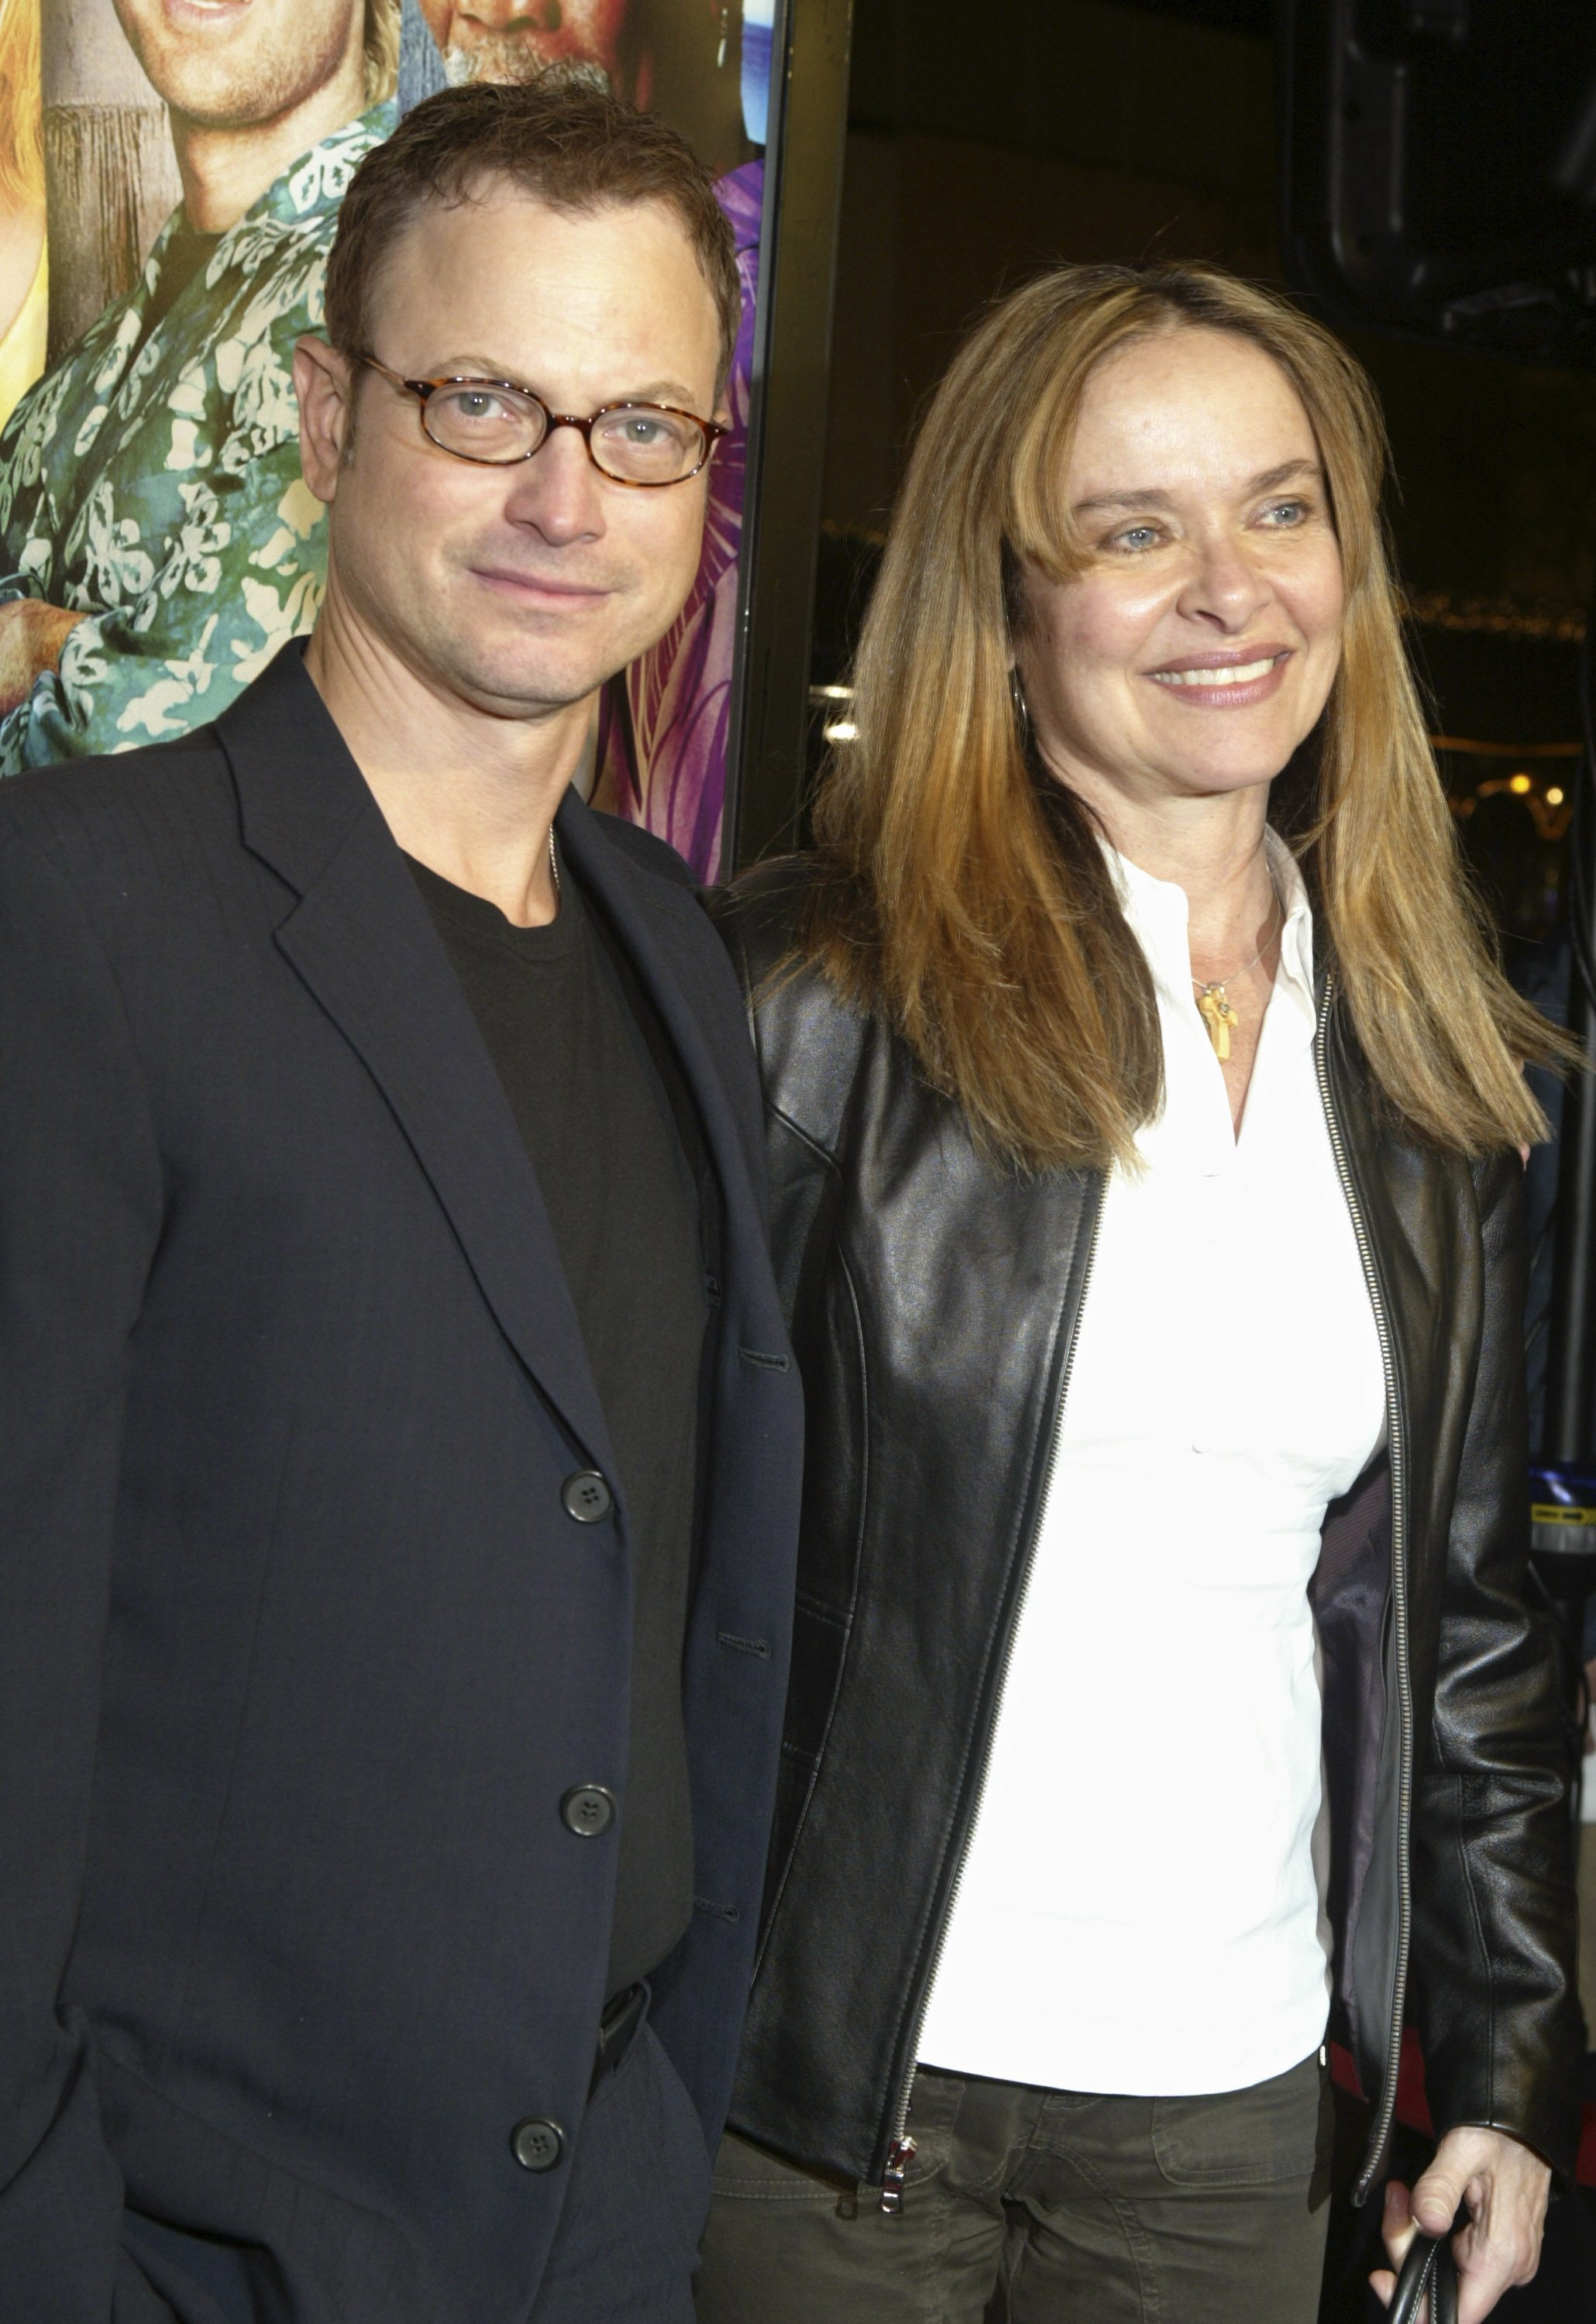 Gary Sinise and Moira Harris at the premiere of "The Big Bounce" at Mann Village Westwood in Westwood, California, on January 29, 2004. | Source: Getty Images